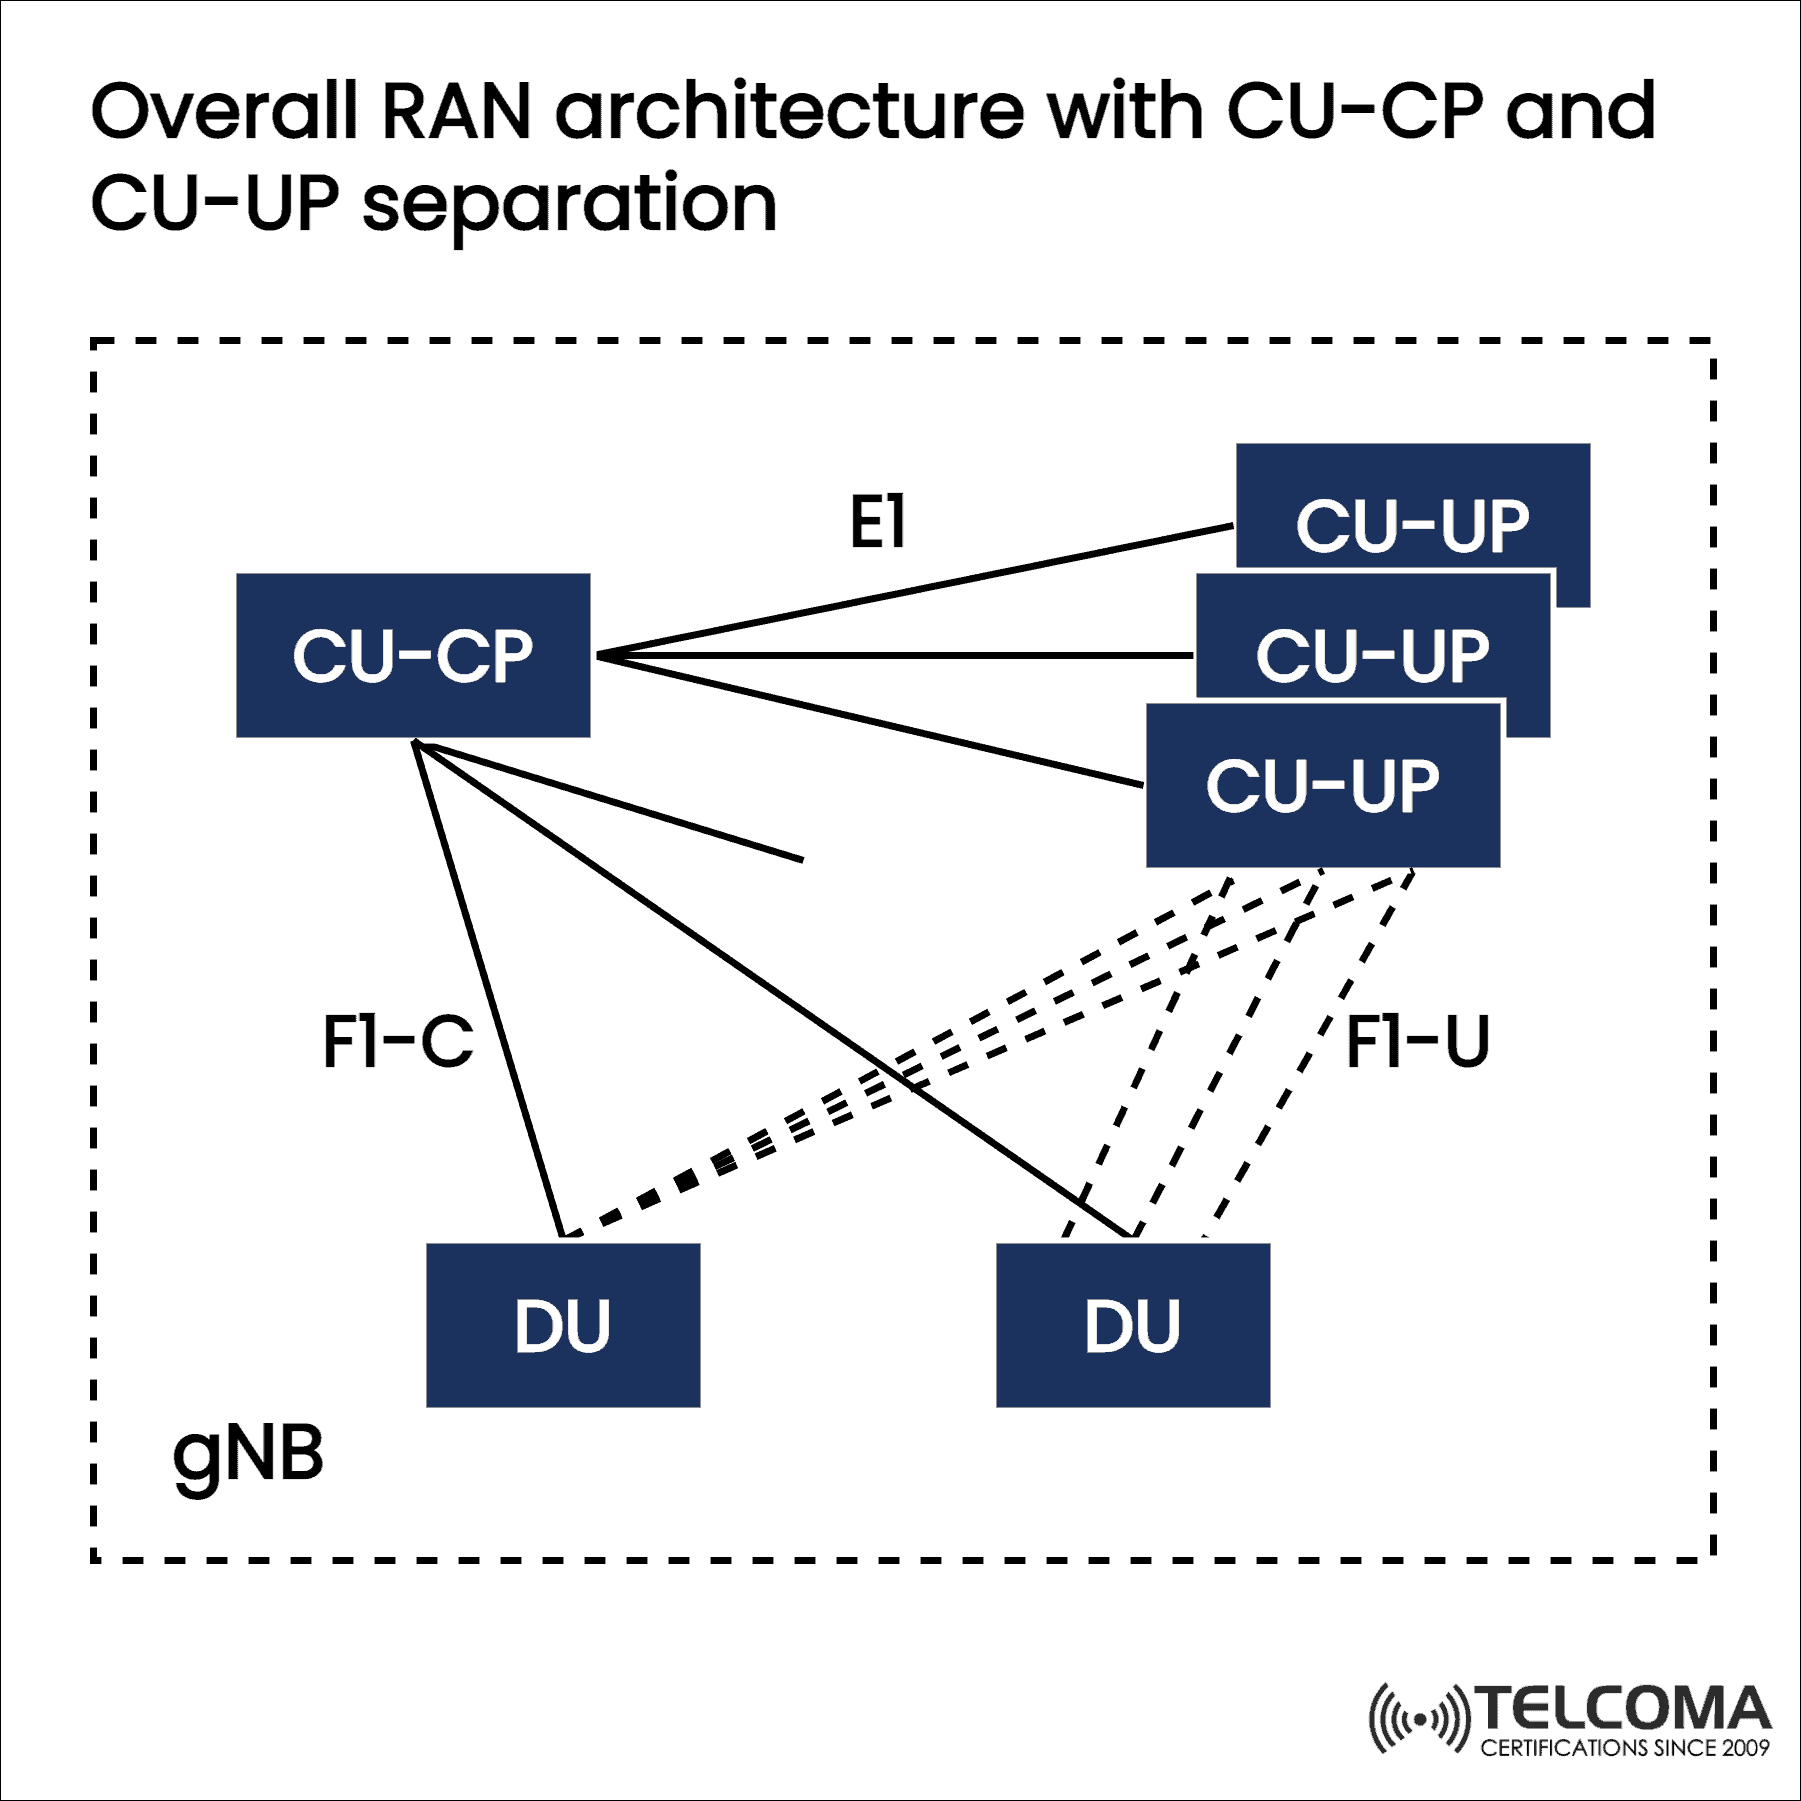 Overall RAN architecture with CU-CP and CU-UP separation (3GPP TR38.806) 